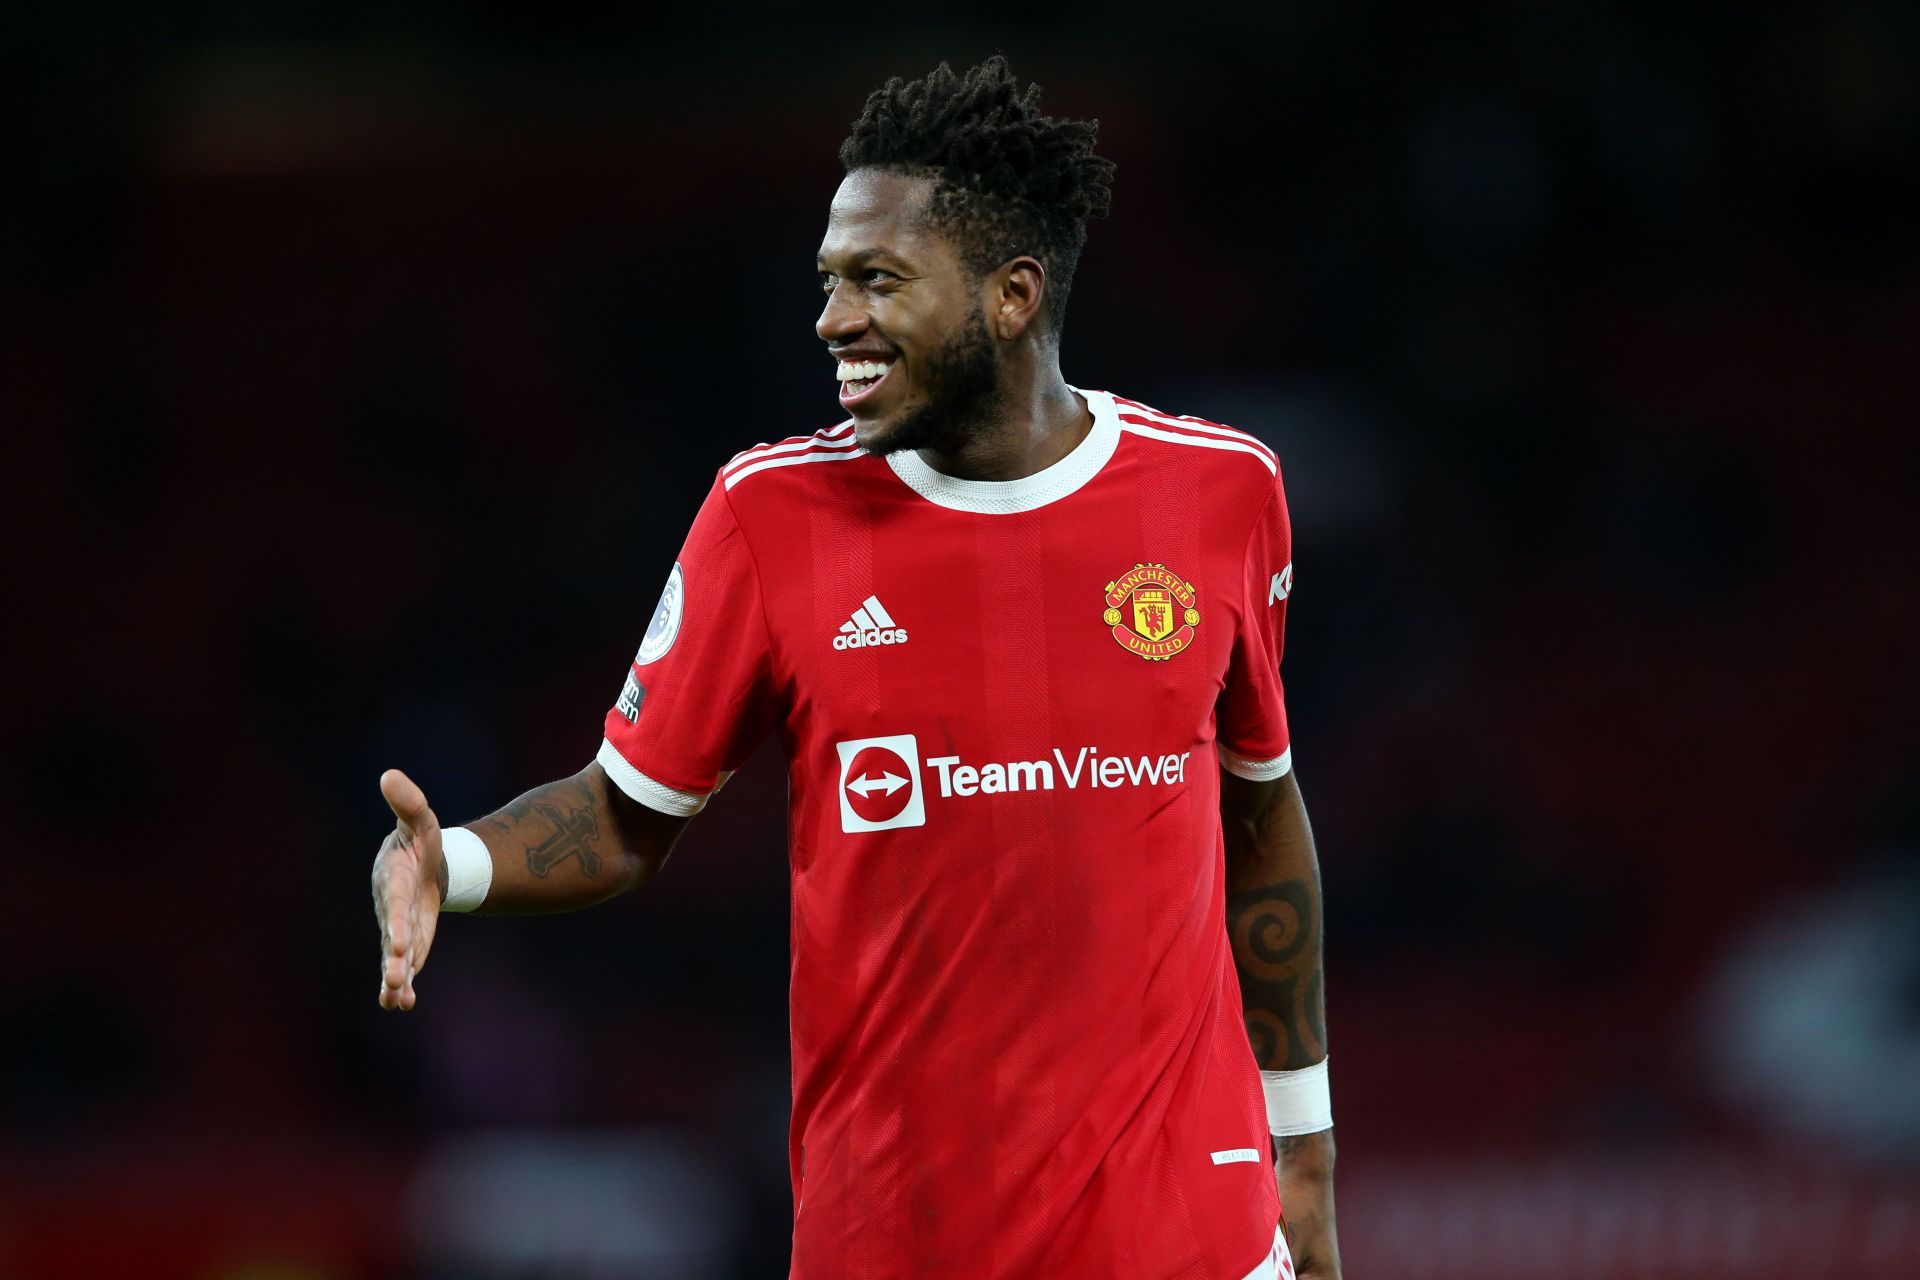 Manchester United midfielder Fred scored a brilliant goal against Crystal Palace on Sunday night